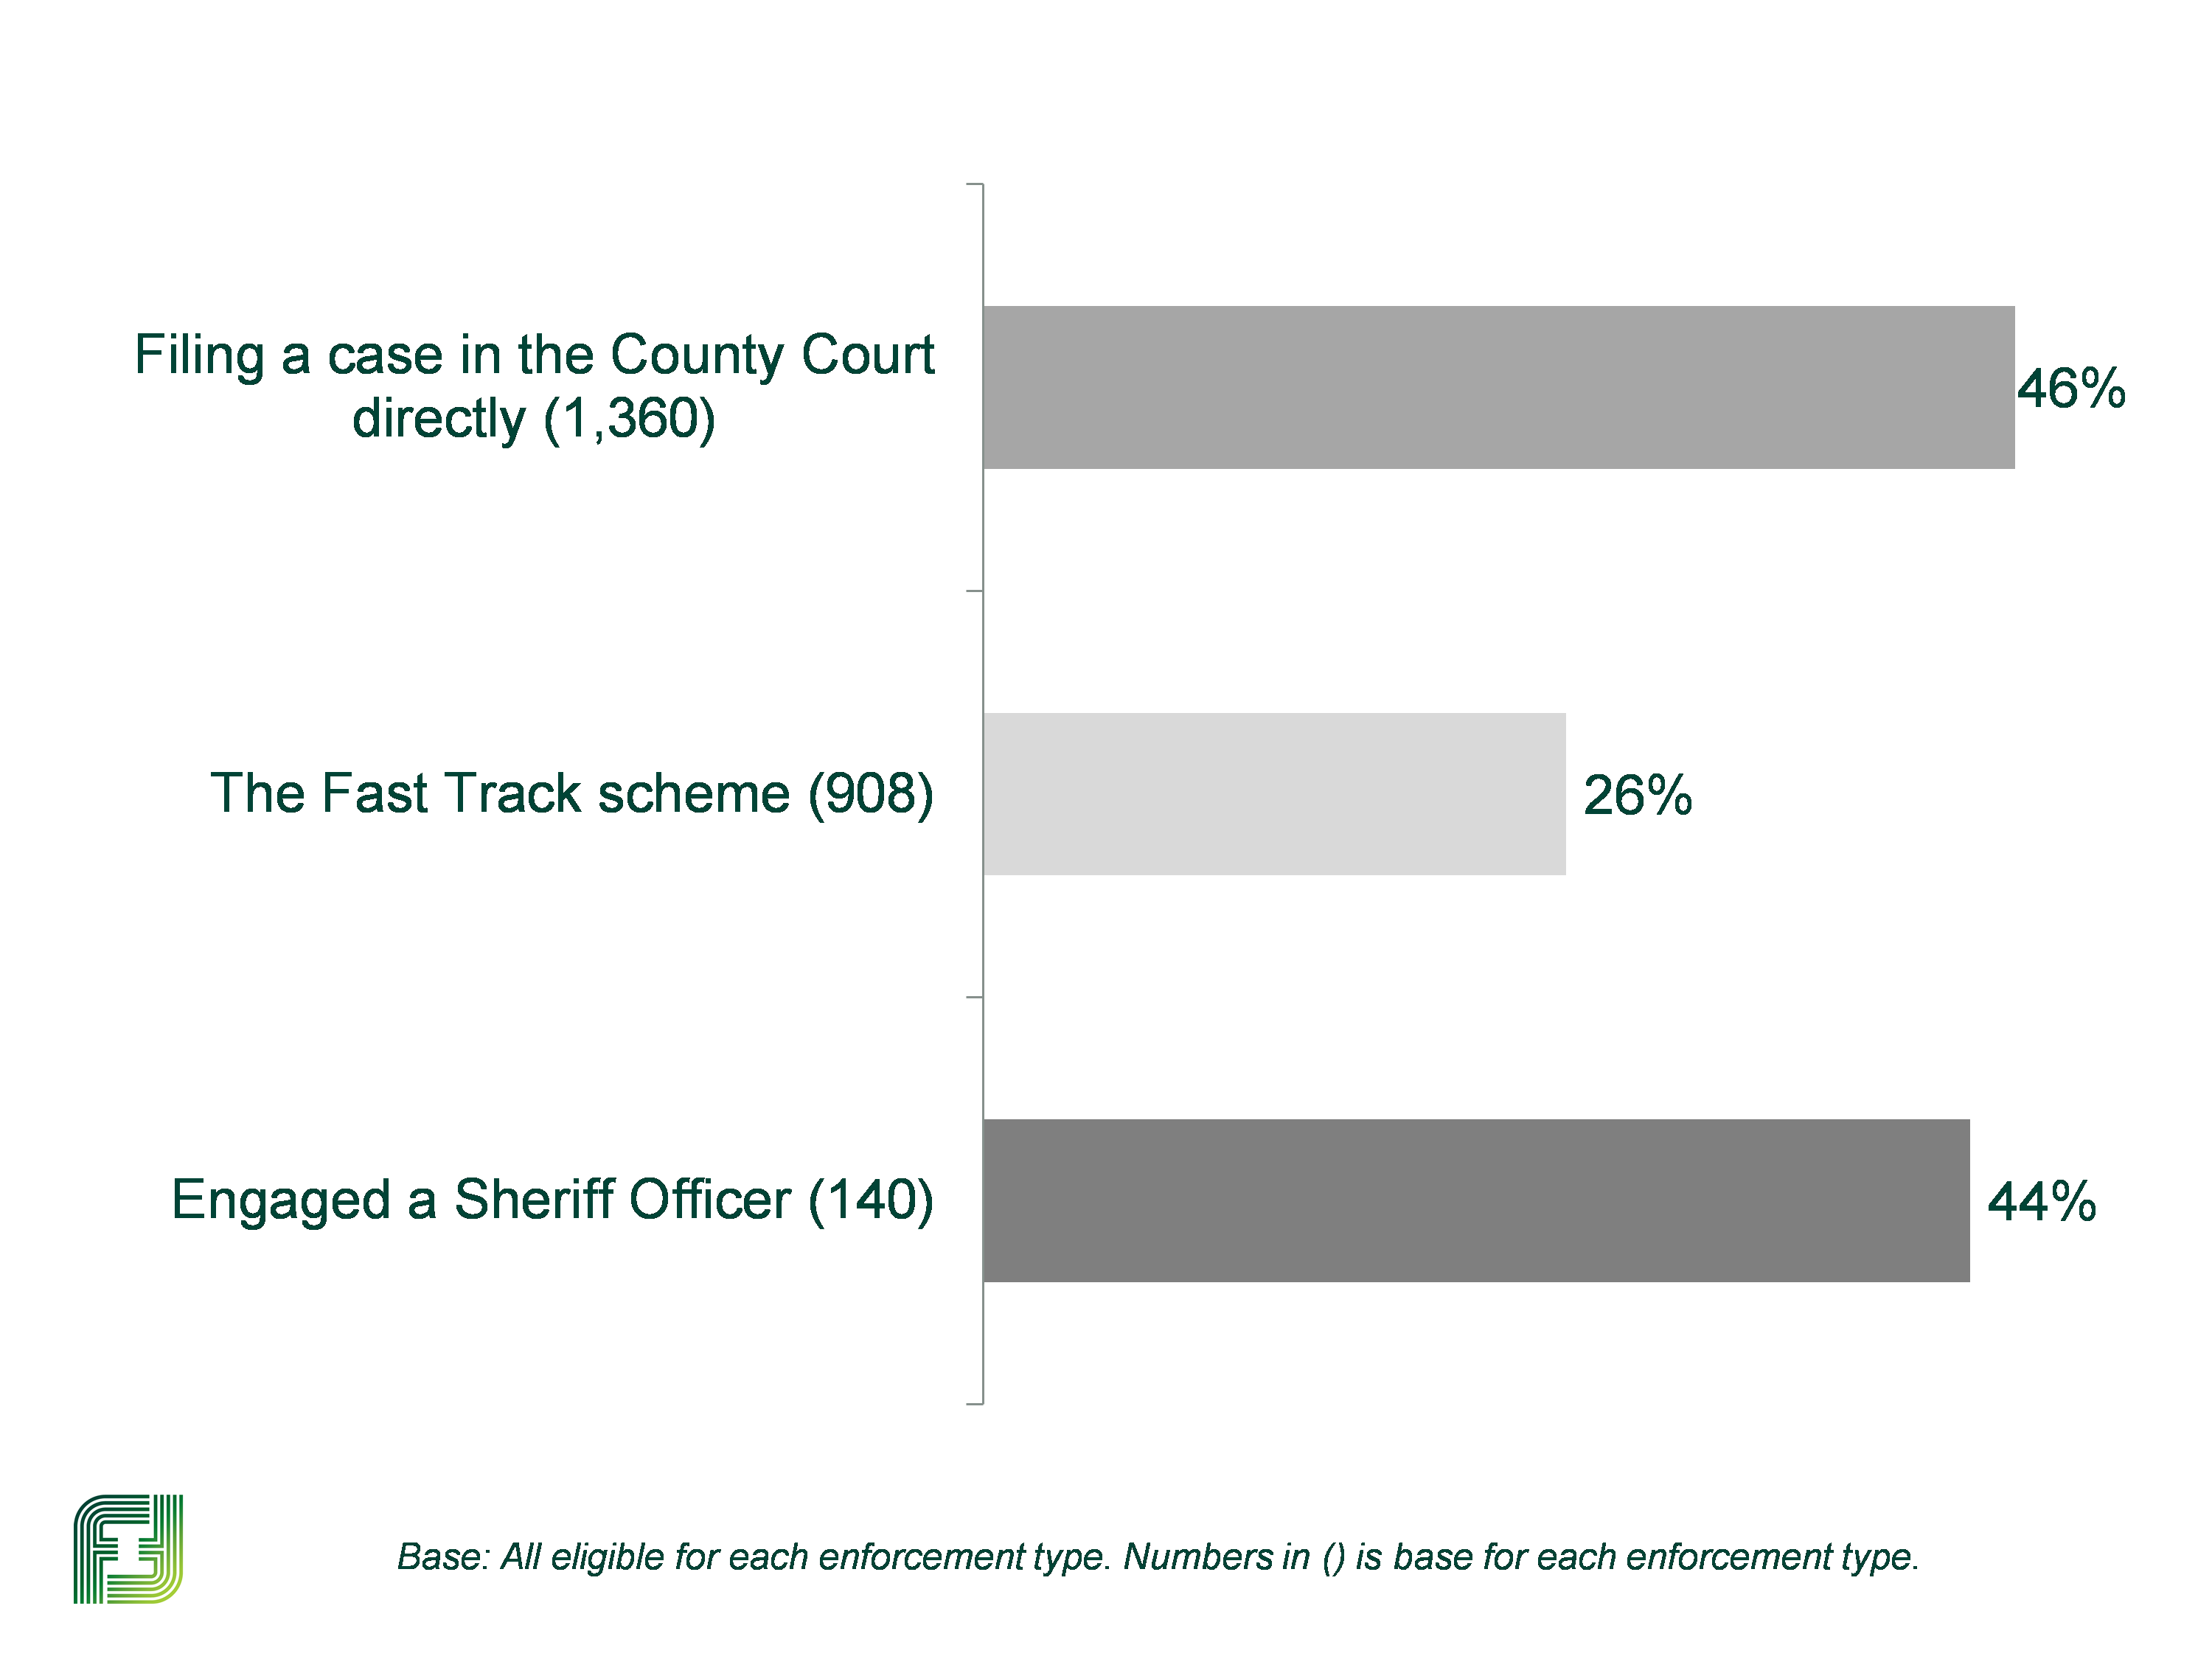 Bar chart showing awareness of enforcement options available: 46% aware of the County Court, 26% fast track scheme, 44% Sheriff Officer.